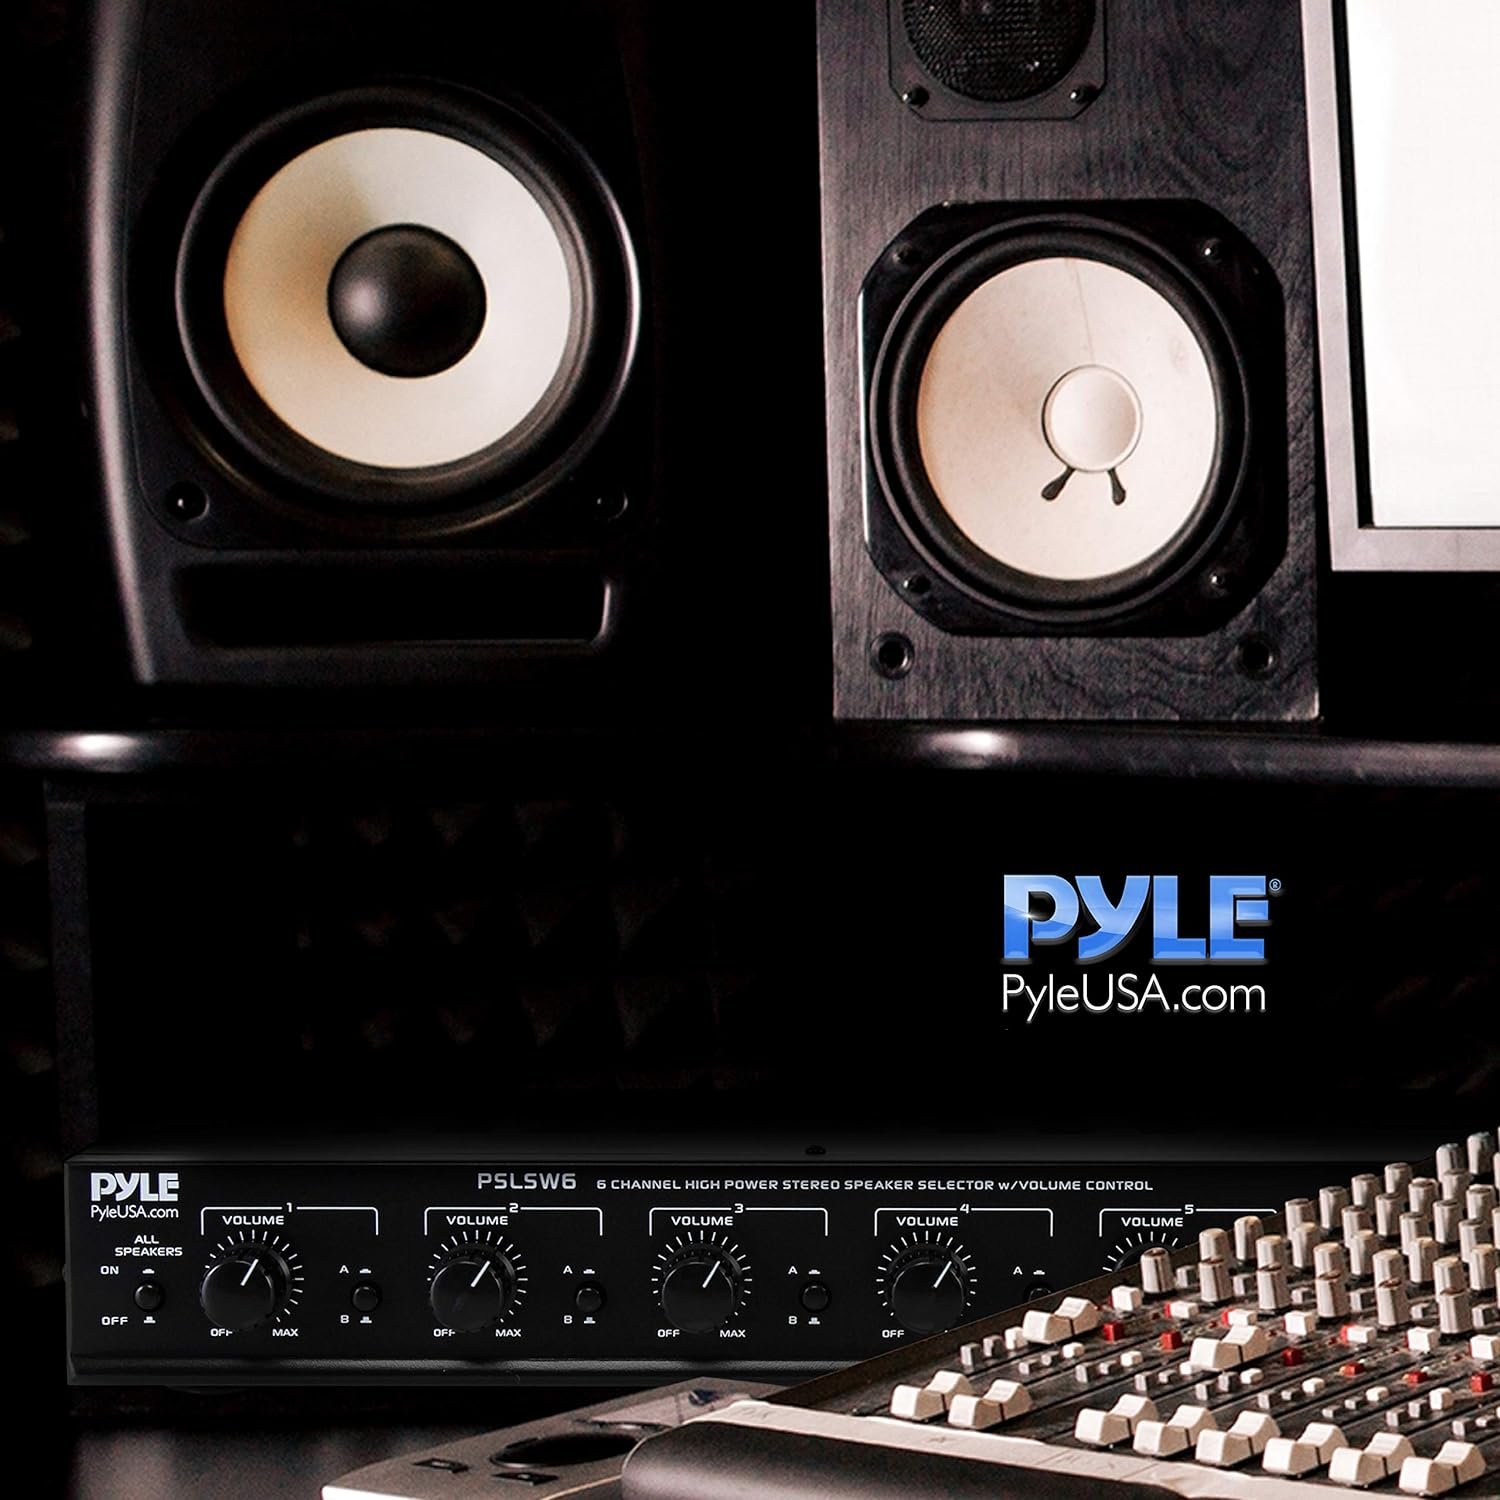 Pyle 6 Channel Speaker Selector Switch - Multi Zone A B Speaker Distribution Controller Box w/ Independent Audio Source Volume Control, Supports Home Theater Stereo Receiver System - Pyle PSLSW6